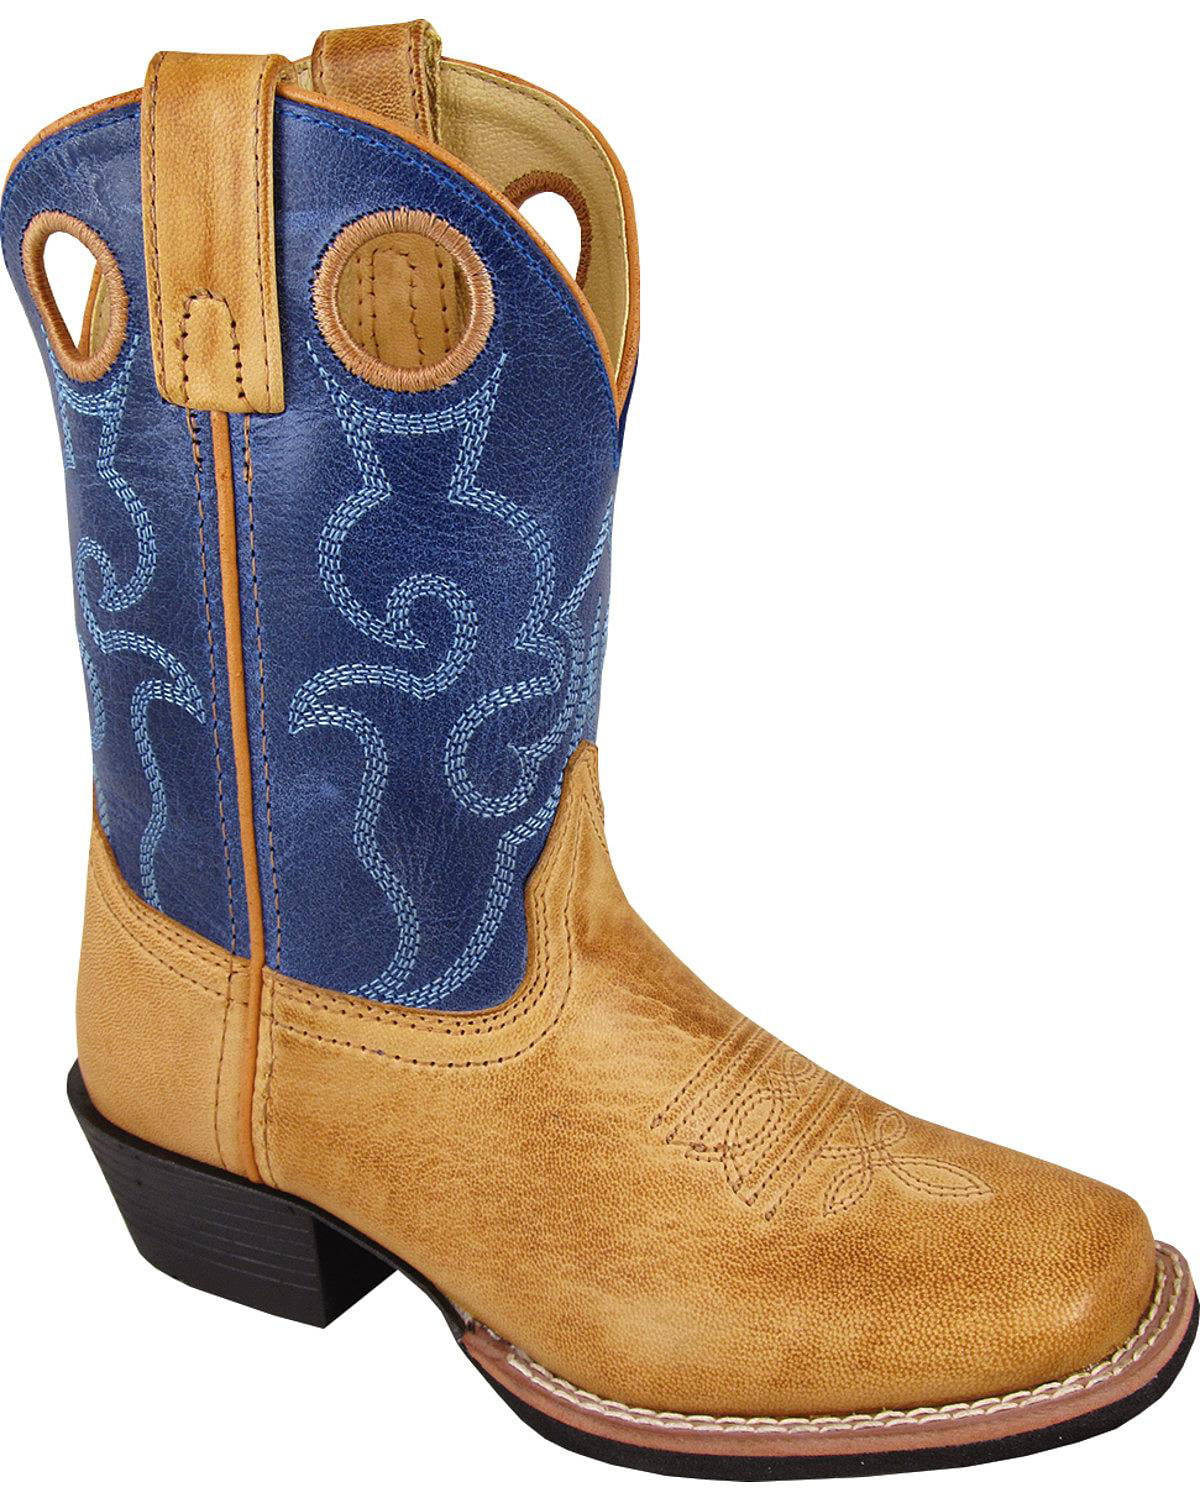 Smoky Mountain Childrens Clint Western Cowboy Boots Leather Square Toe Tan/Green 